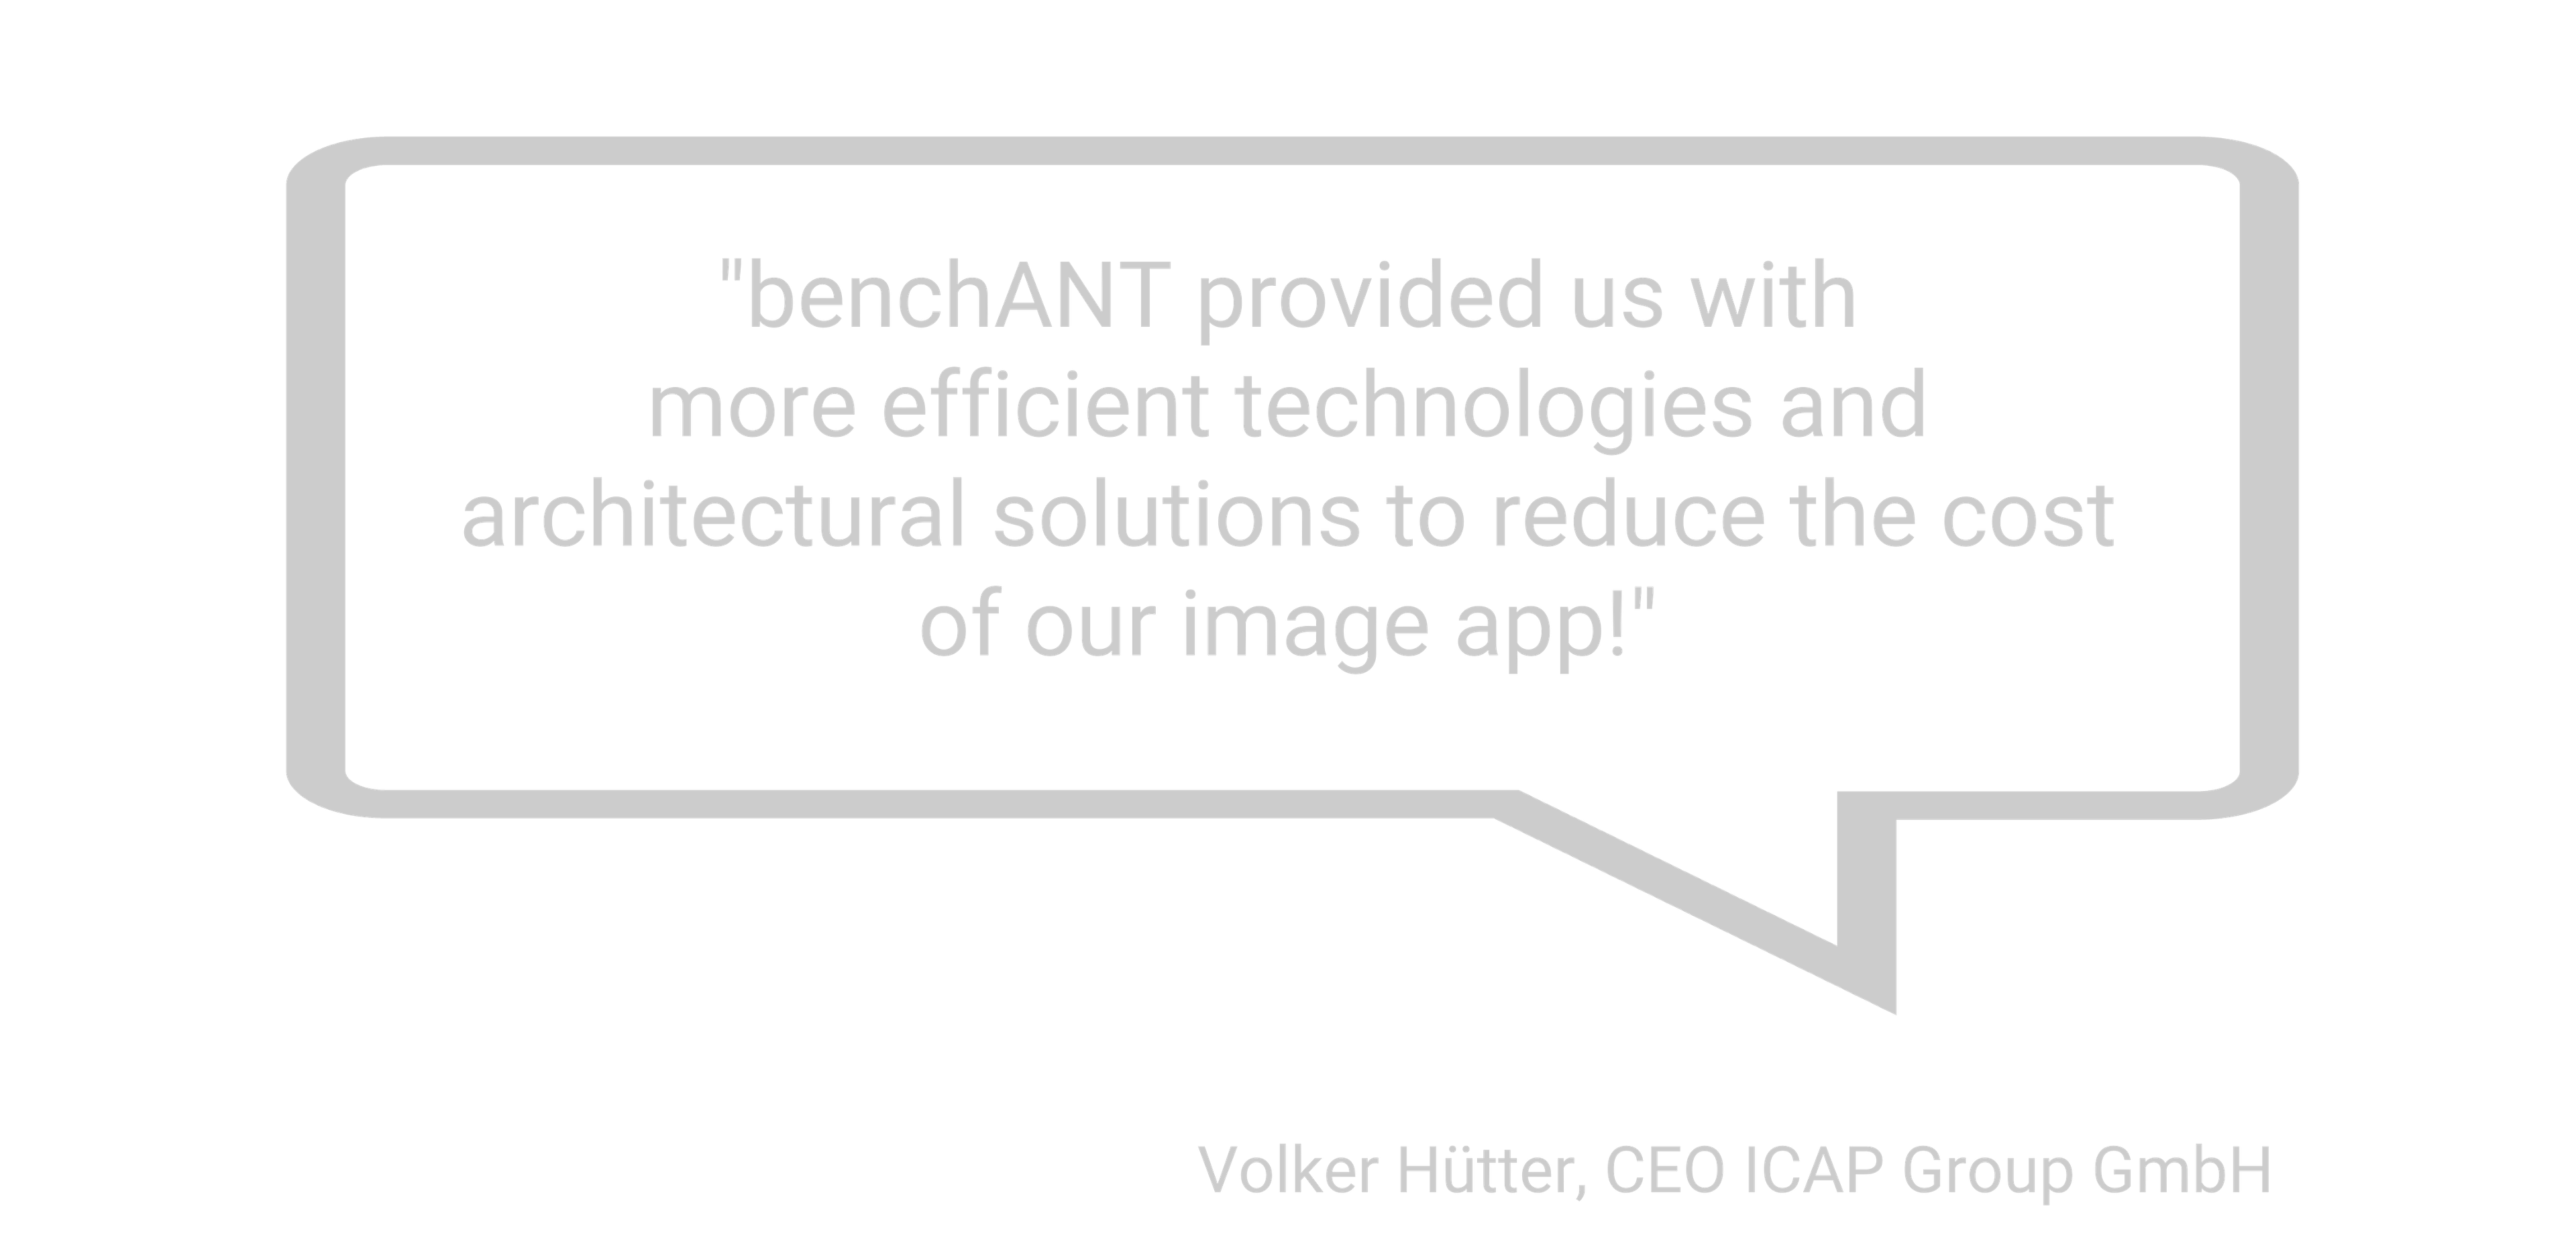 Quote from Volker Hütter, ICAP, about benchANT